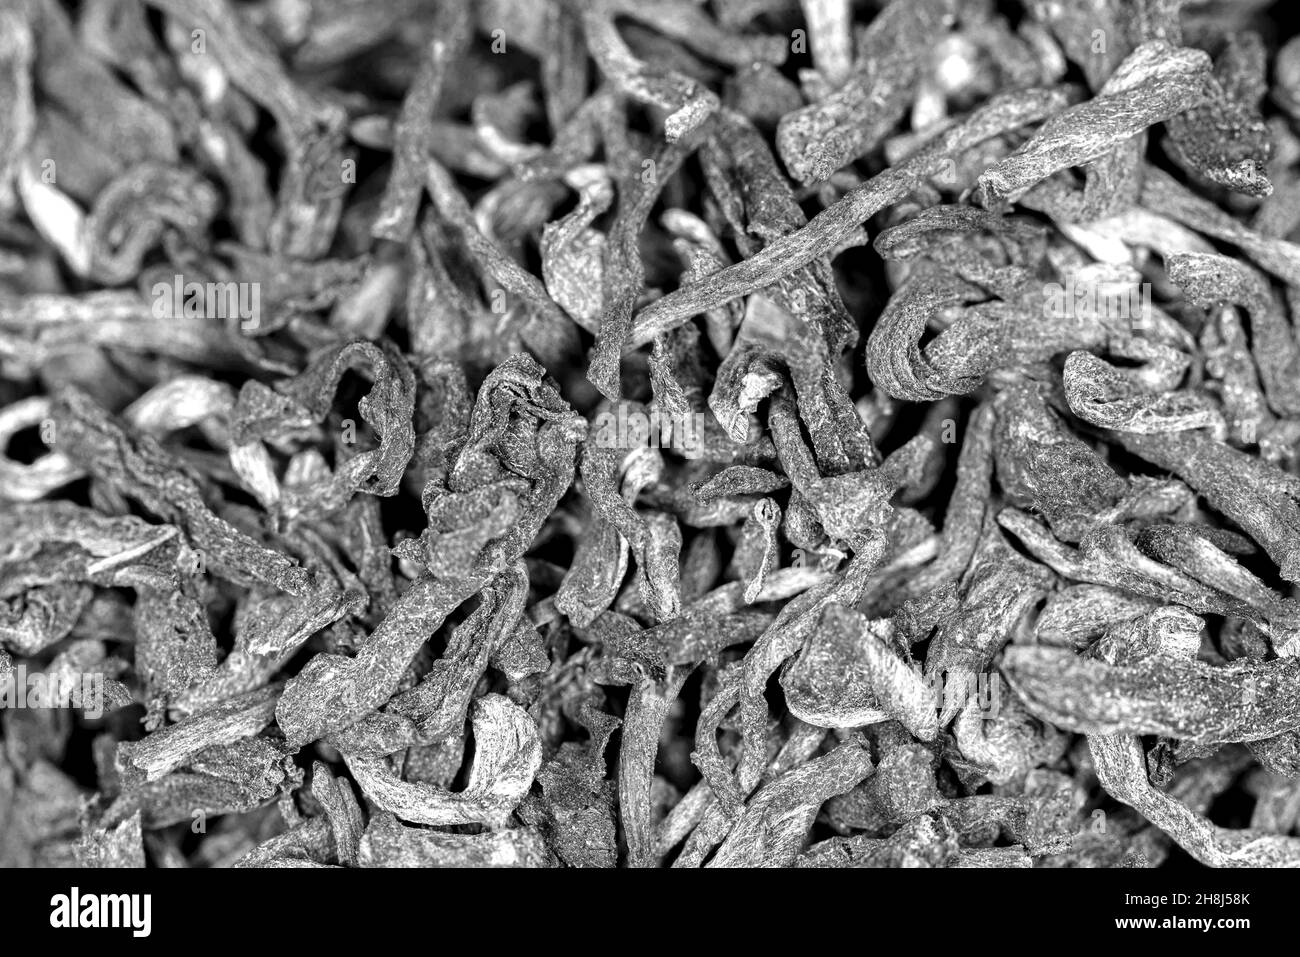 Tea of clove Black and White Stock Photos & Images - Alamy